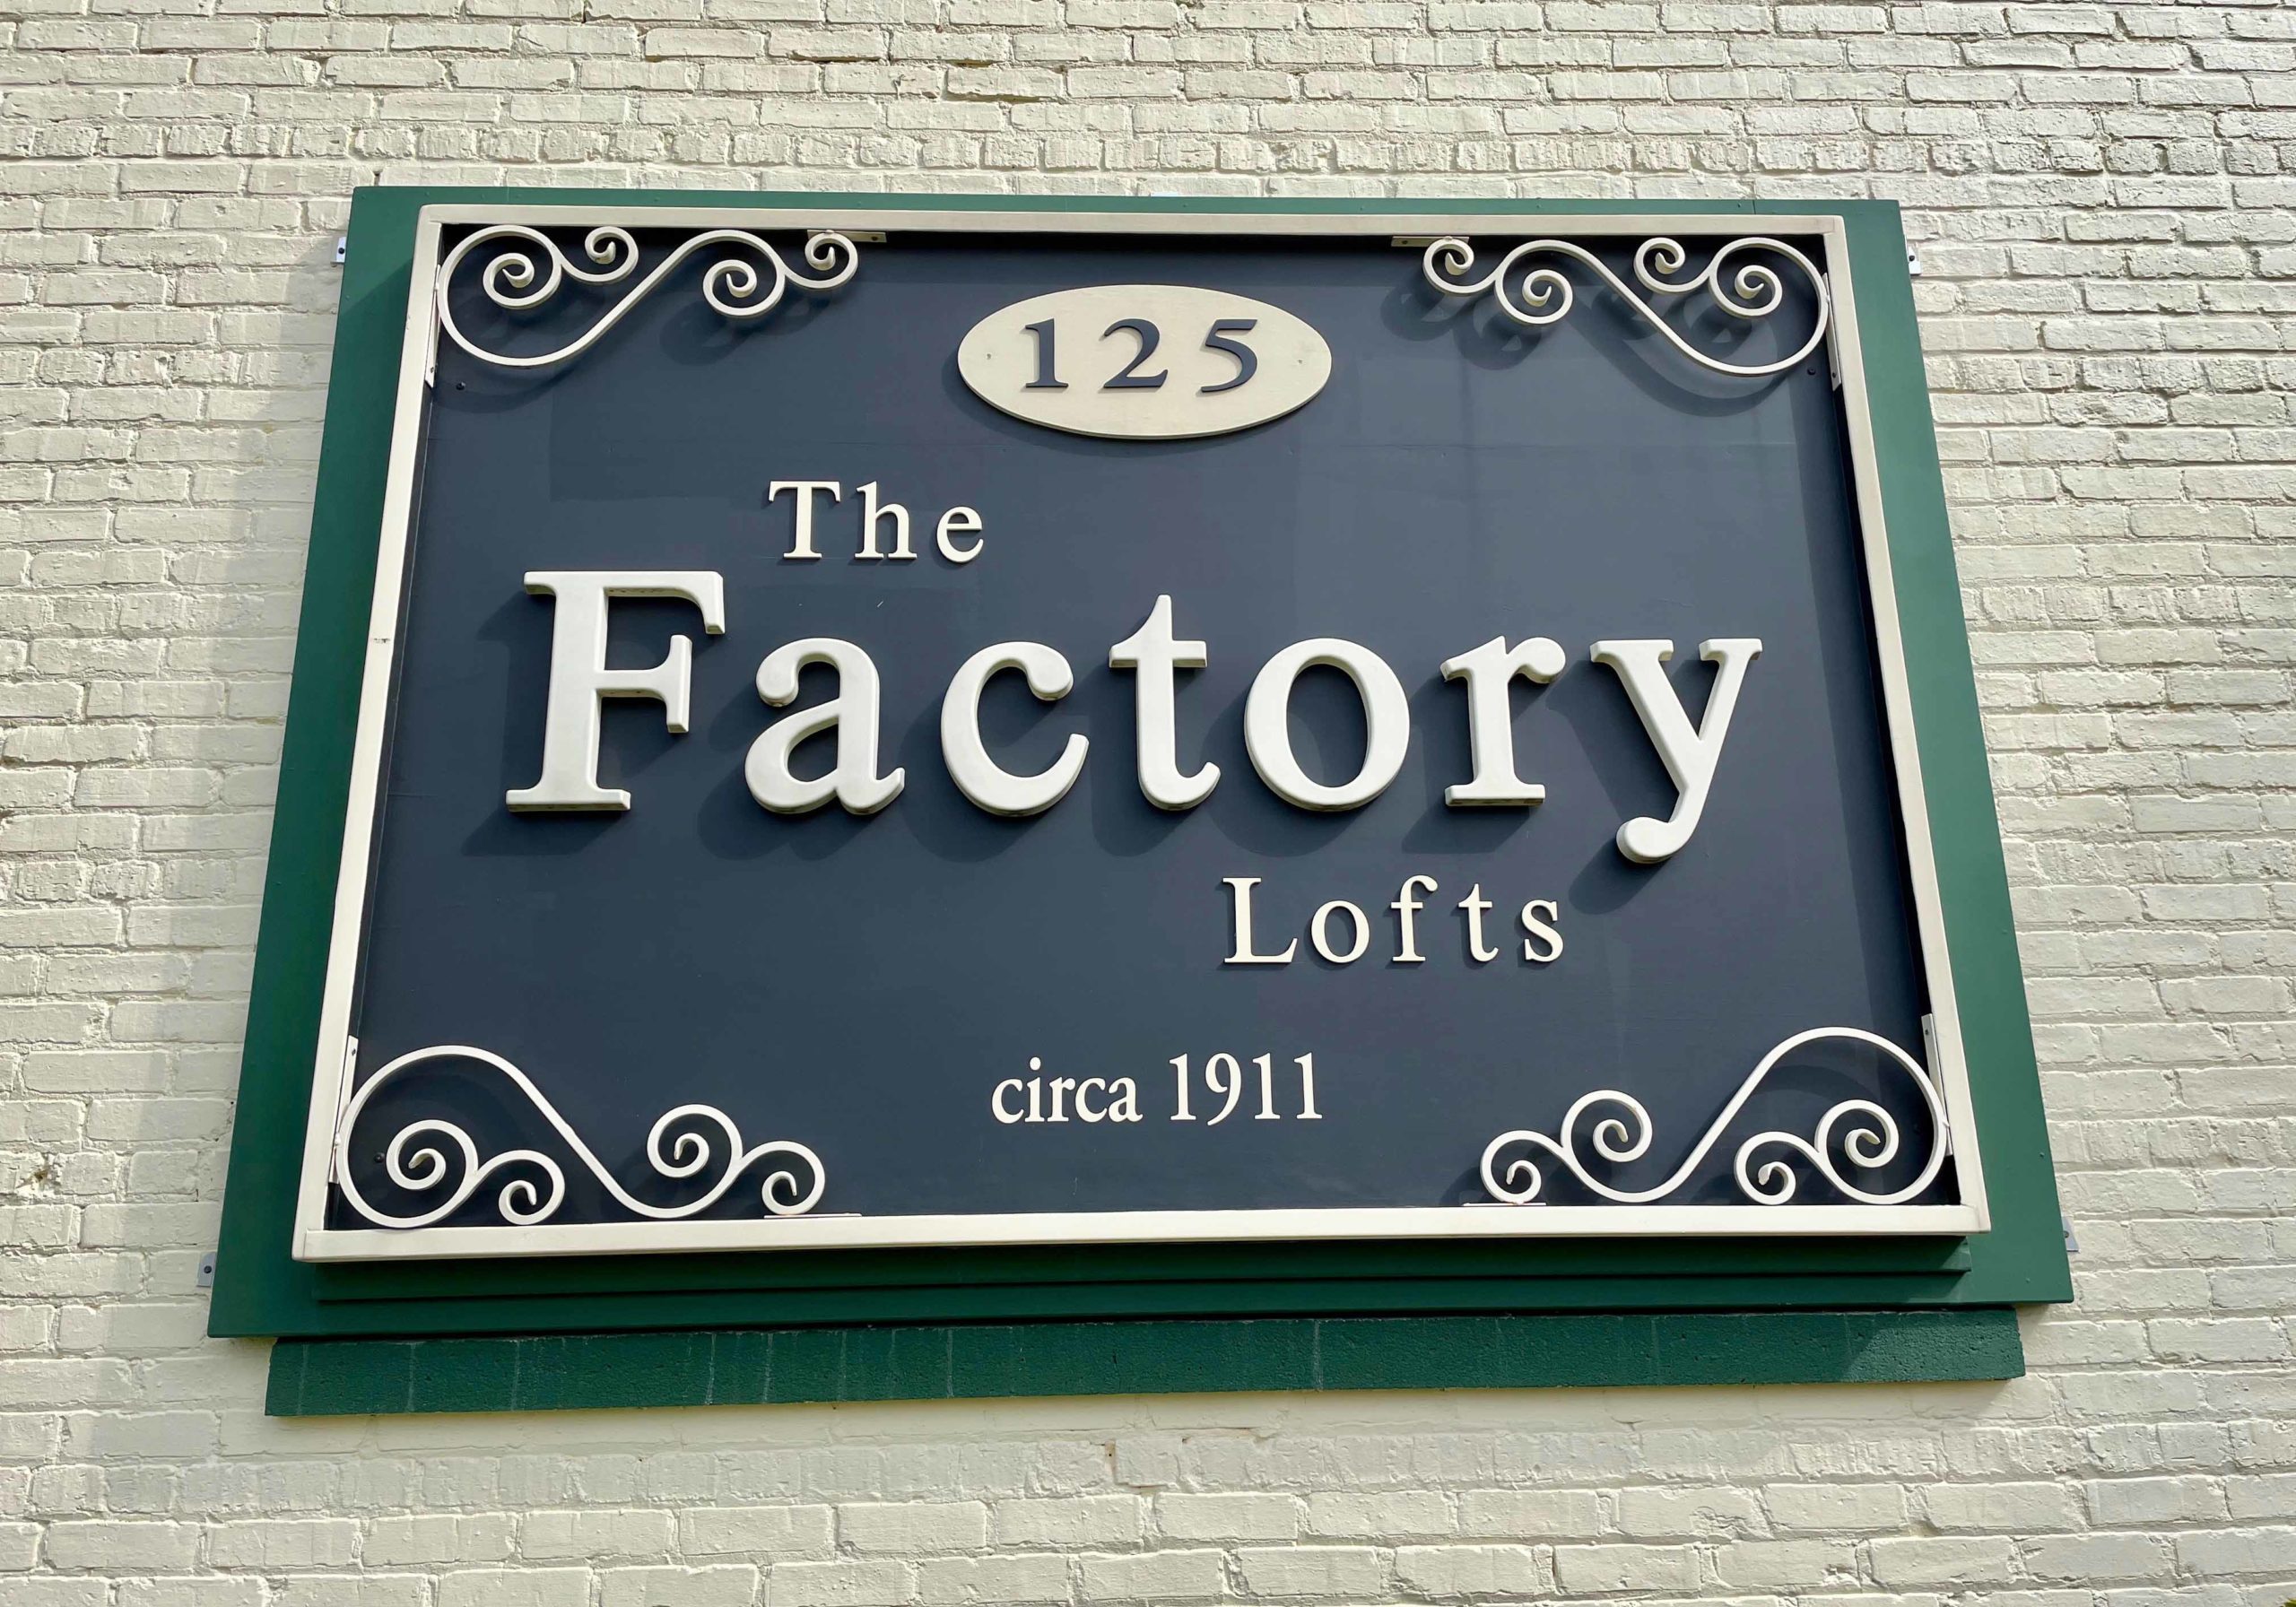 The Factory Lofts